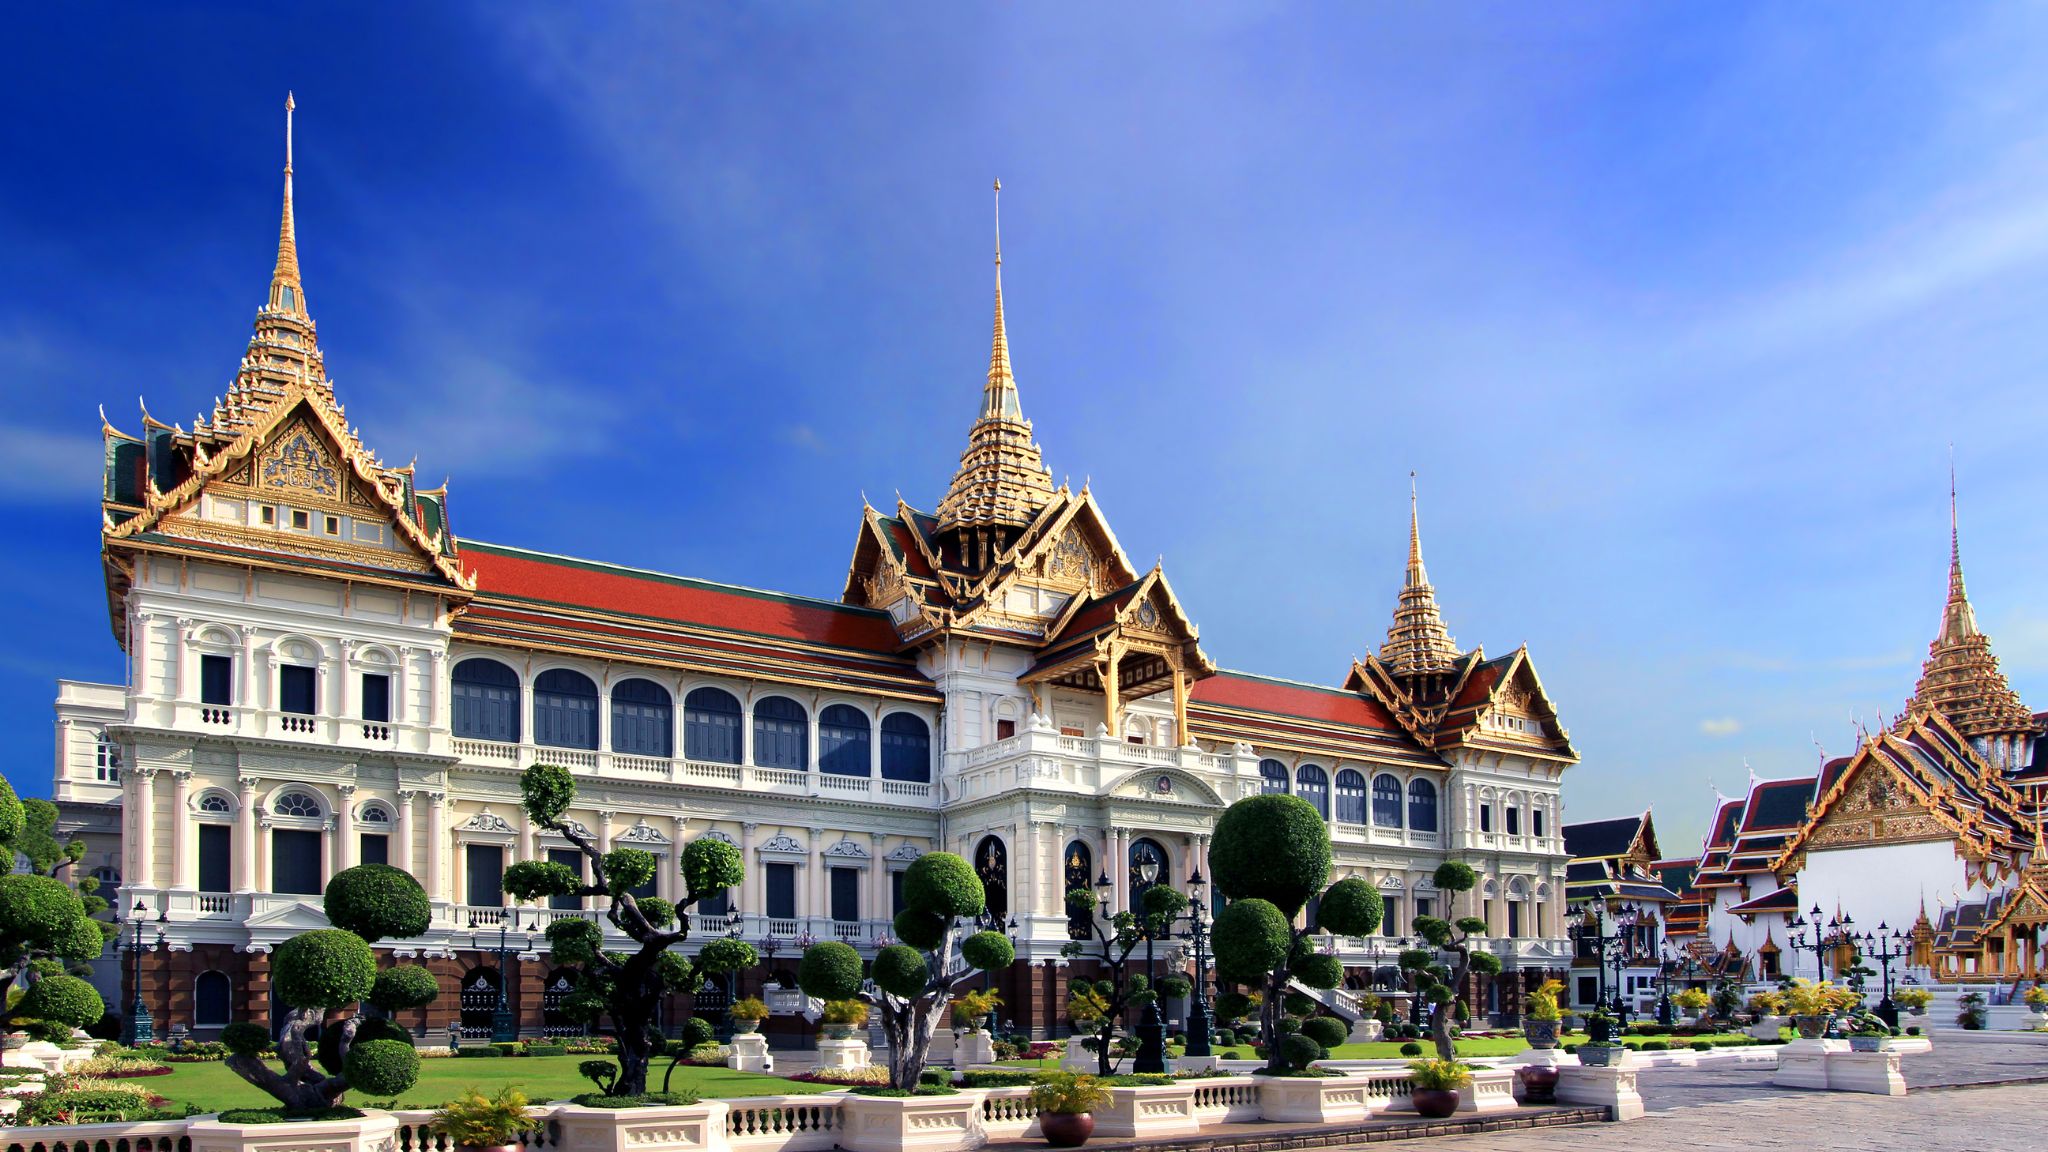 Day 2 Discover The Diverse Culture In Grand Palace